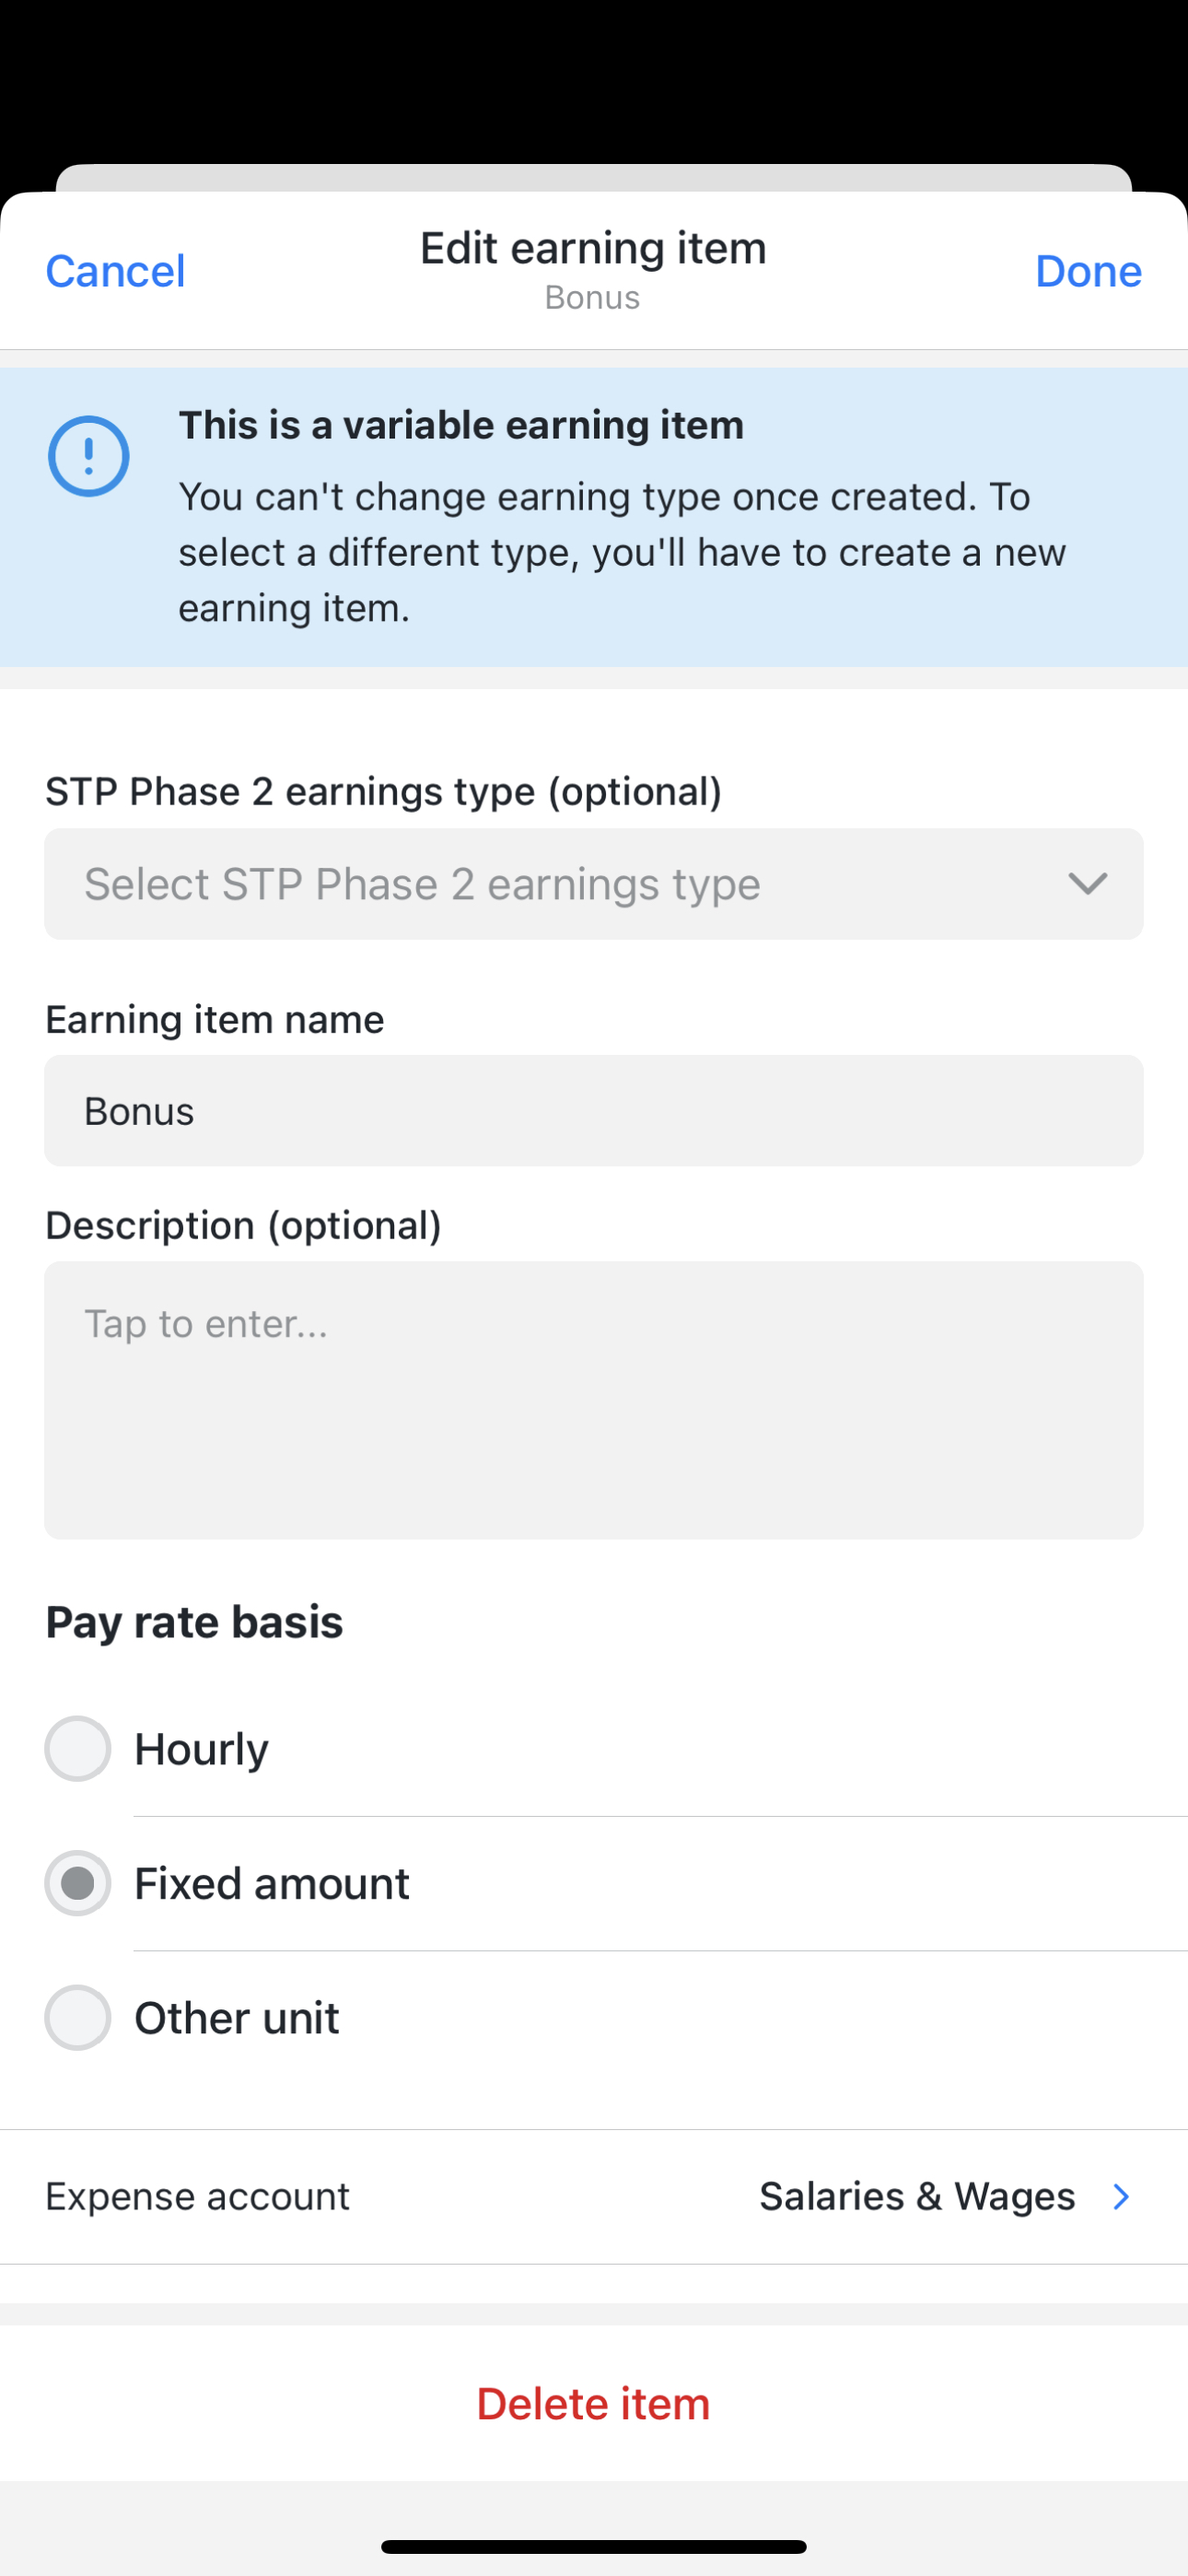 Earning item with STP Phase 2 earning type (optional) field